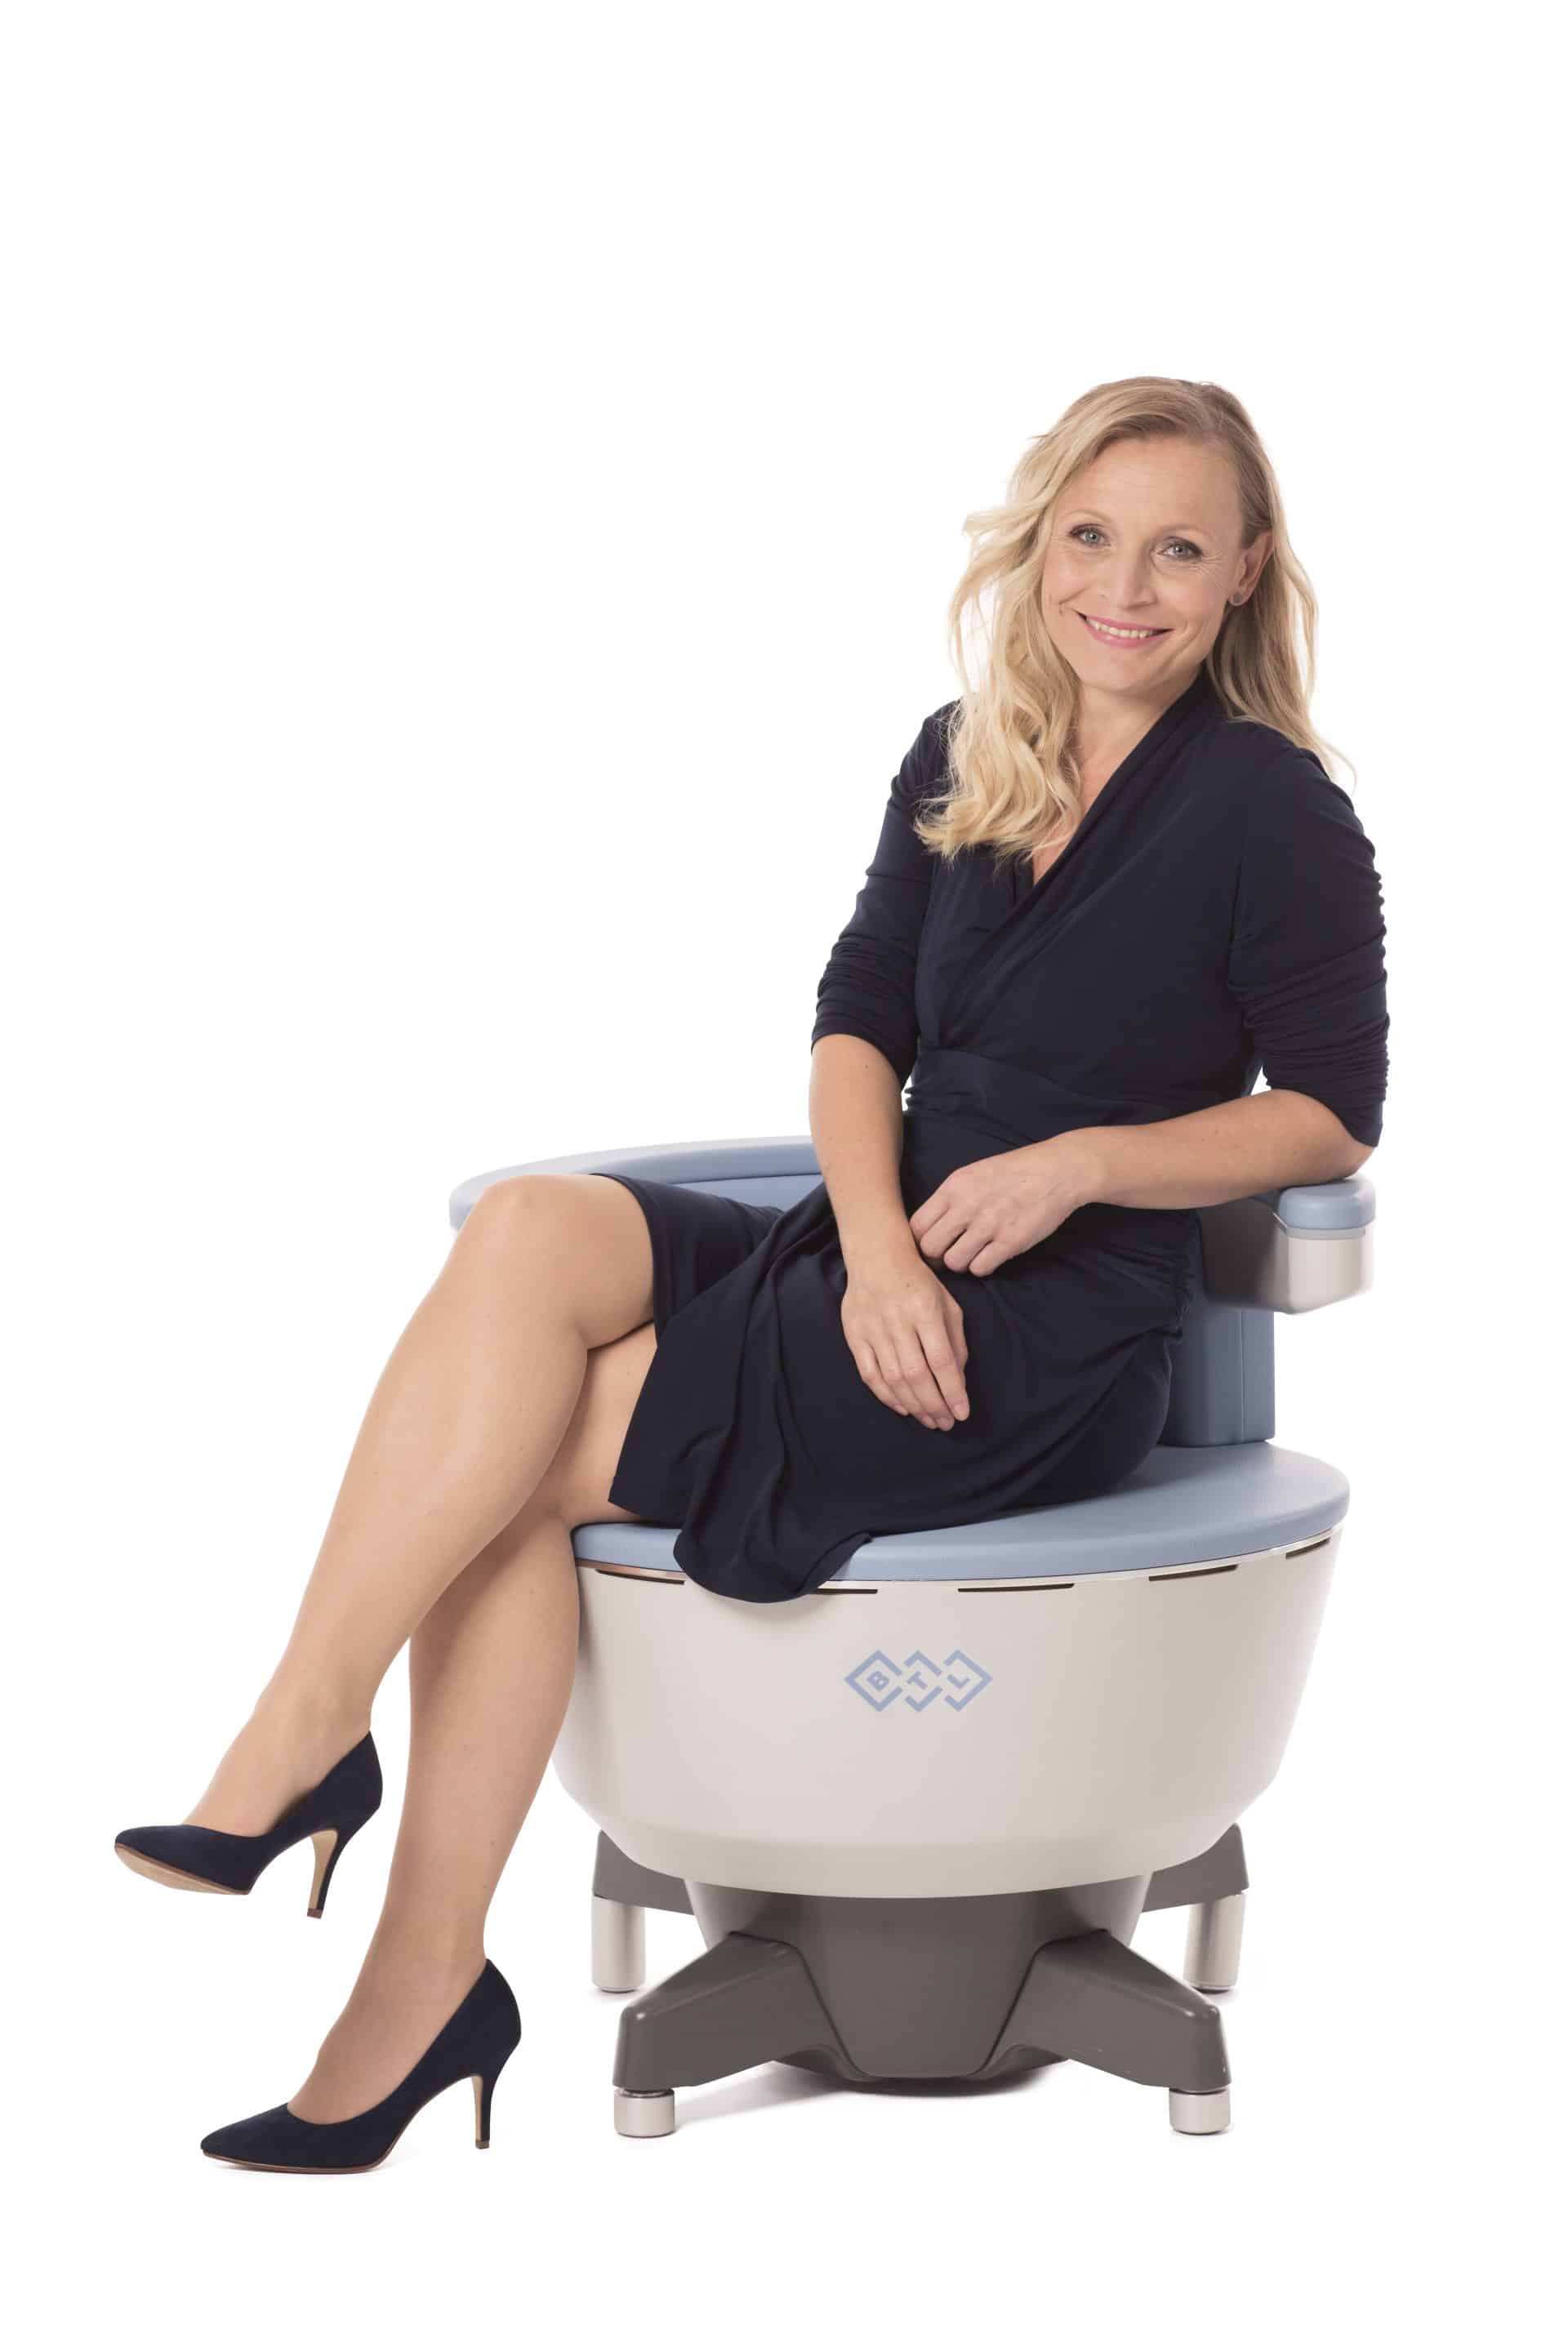 The EMSELLA CHAIR is a revolutionary treatment that may help improve your sex life and give you stronger, more frequent orgasms as a side effect to strengthening your pelvic floor. Several studies have shown that pelvic floor weakness and imbalance can sexual dysfunction for both men and women.